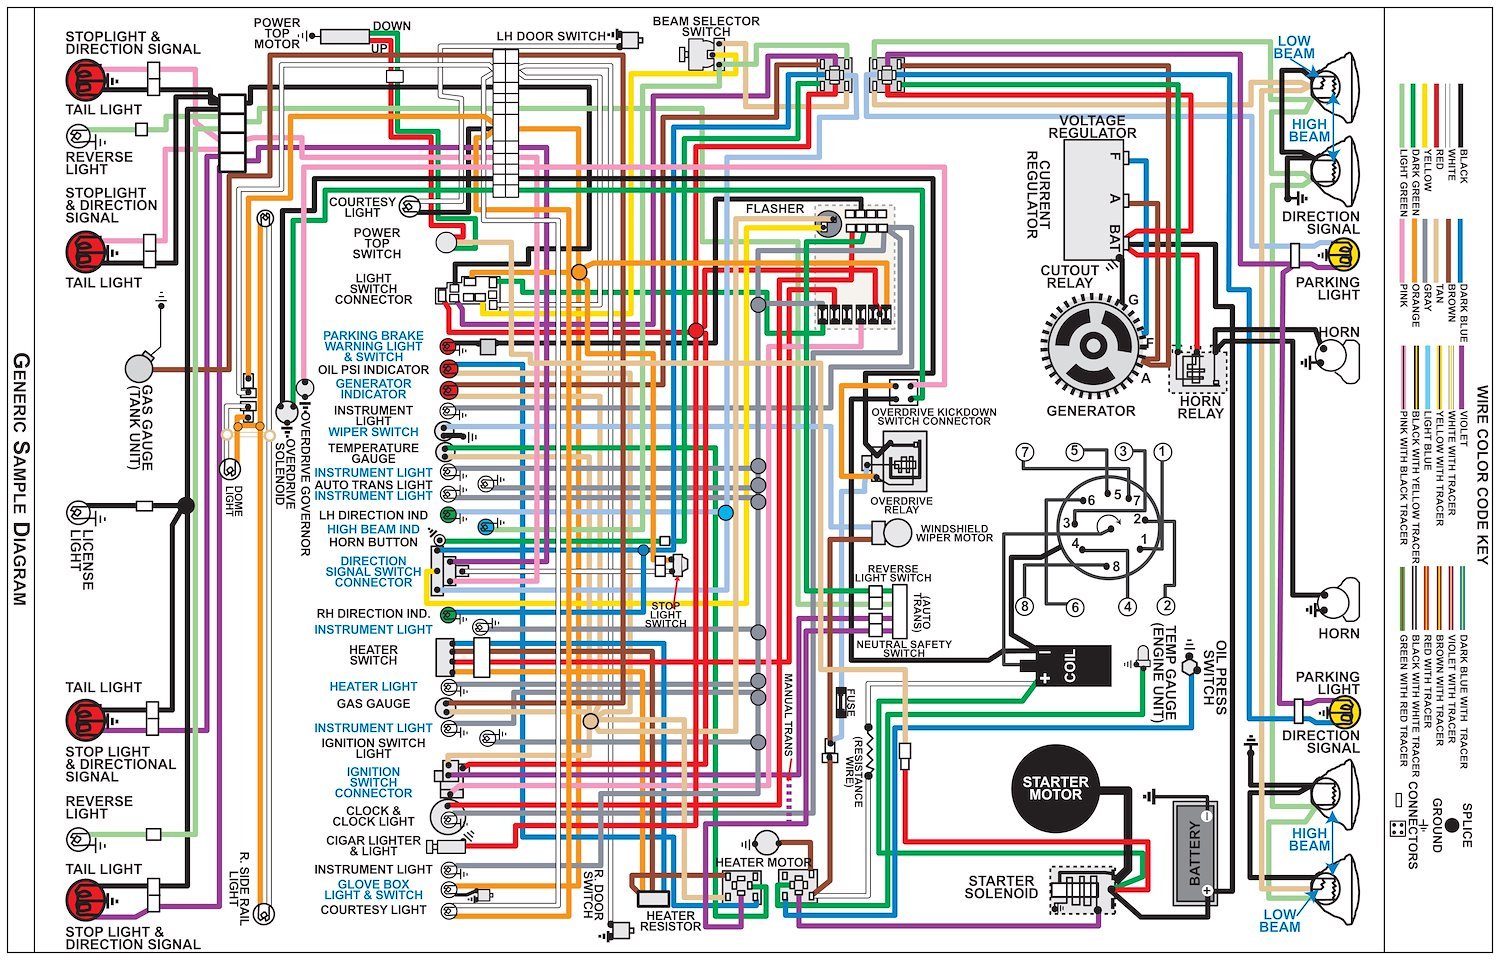 Wiring Diagram for 1968 Dodge Coronet, 11 in x 17 in., Laminated